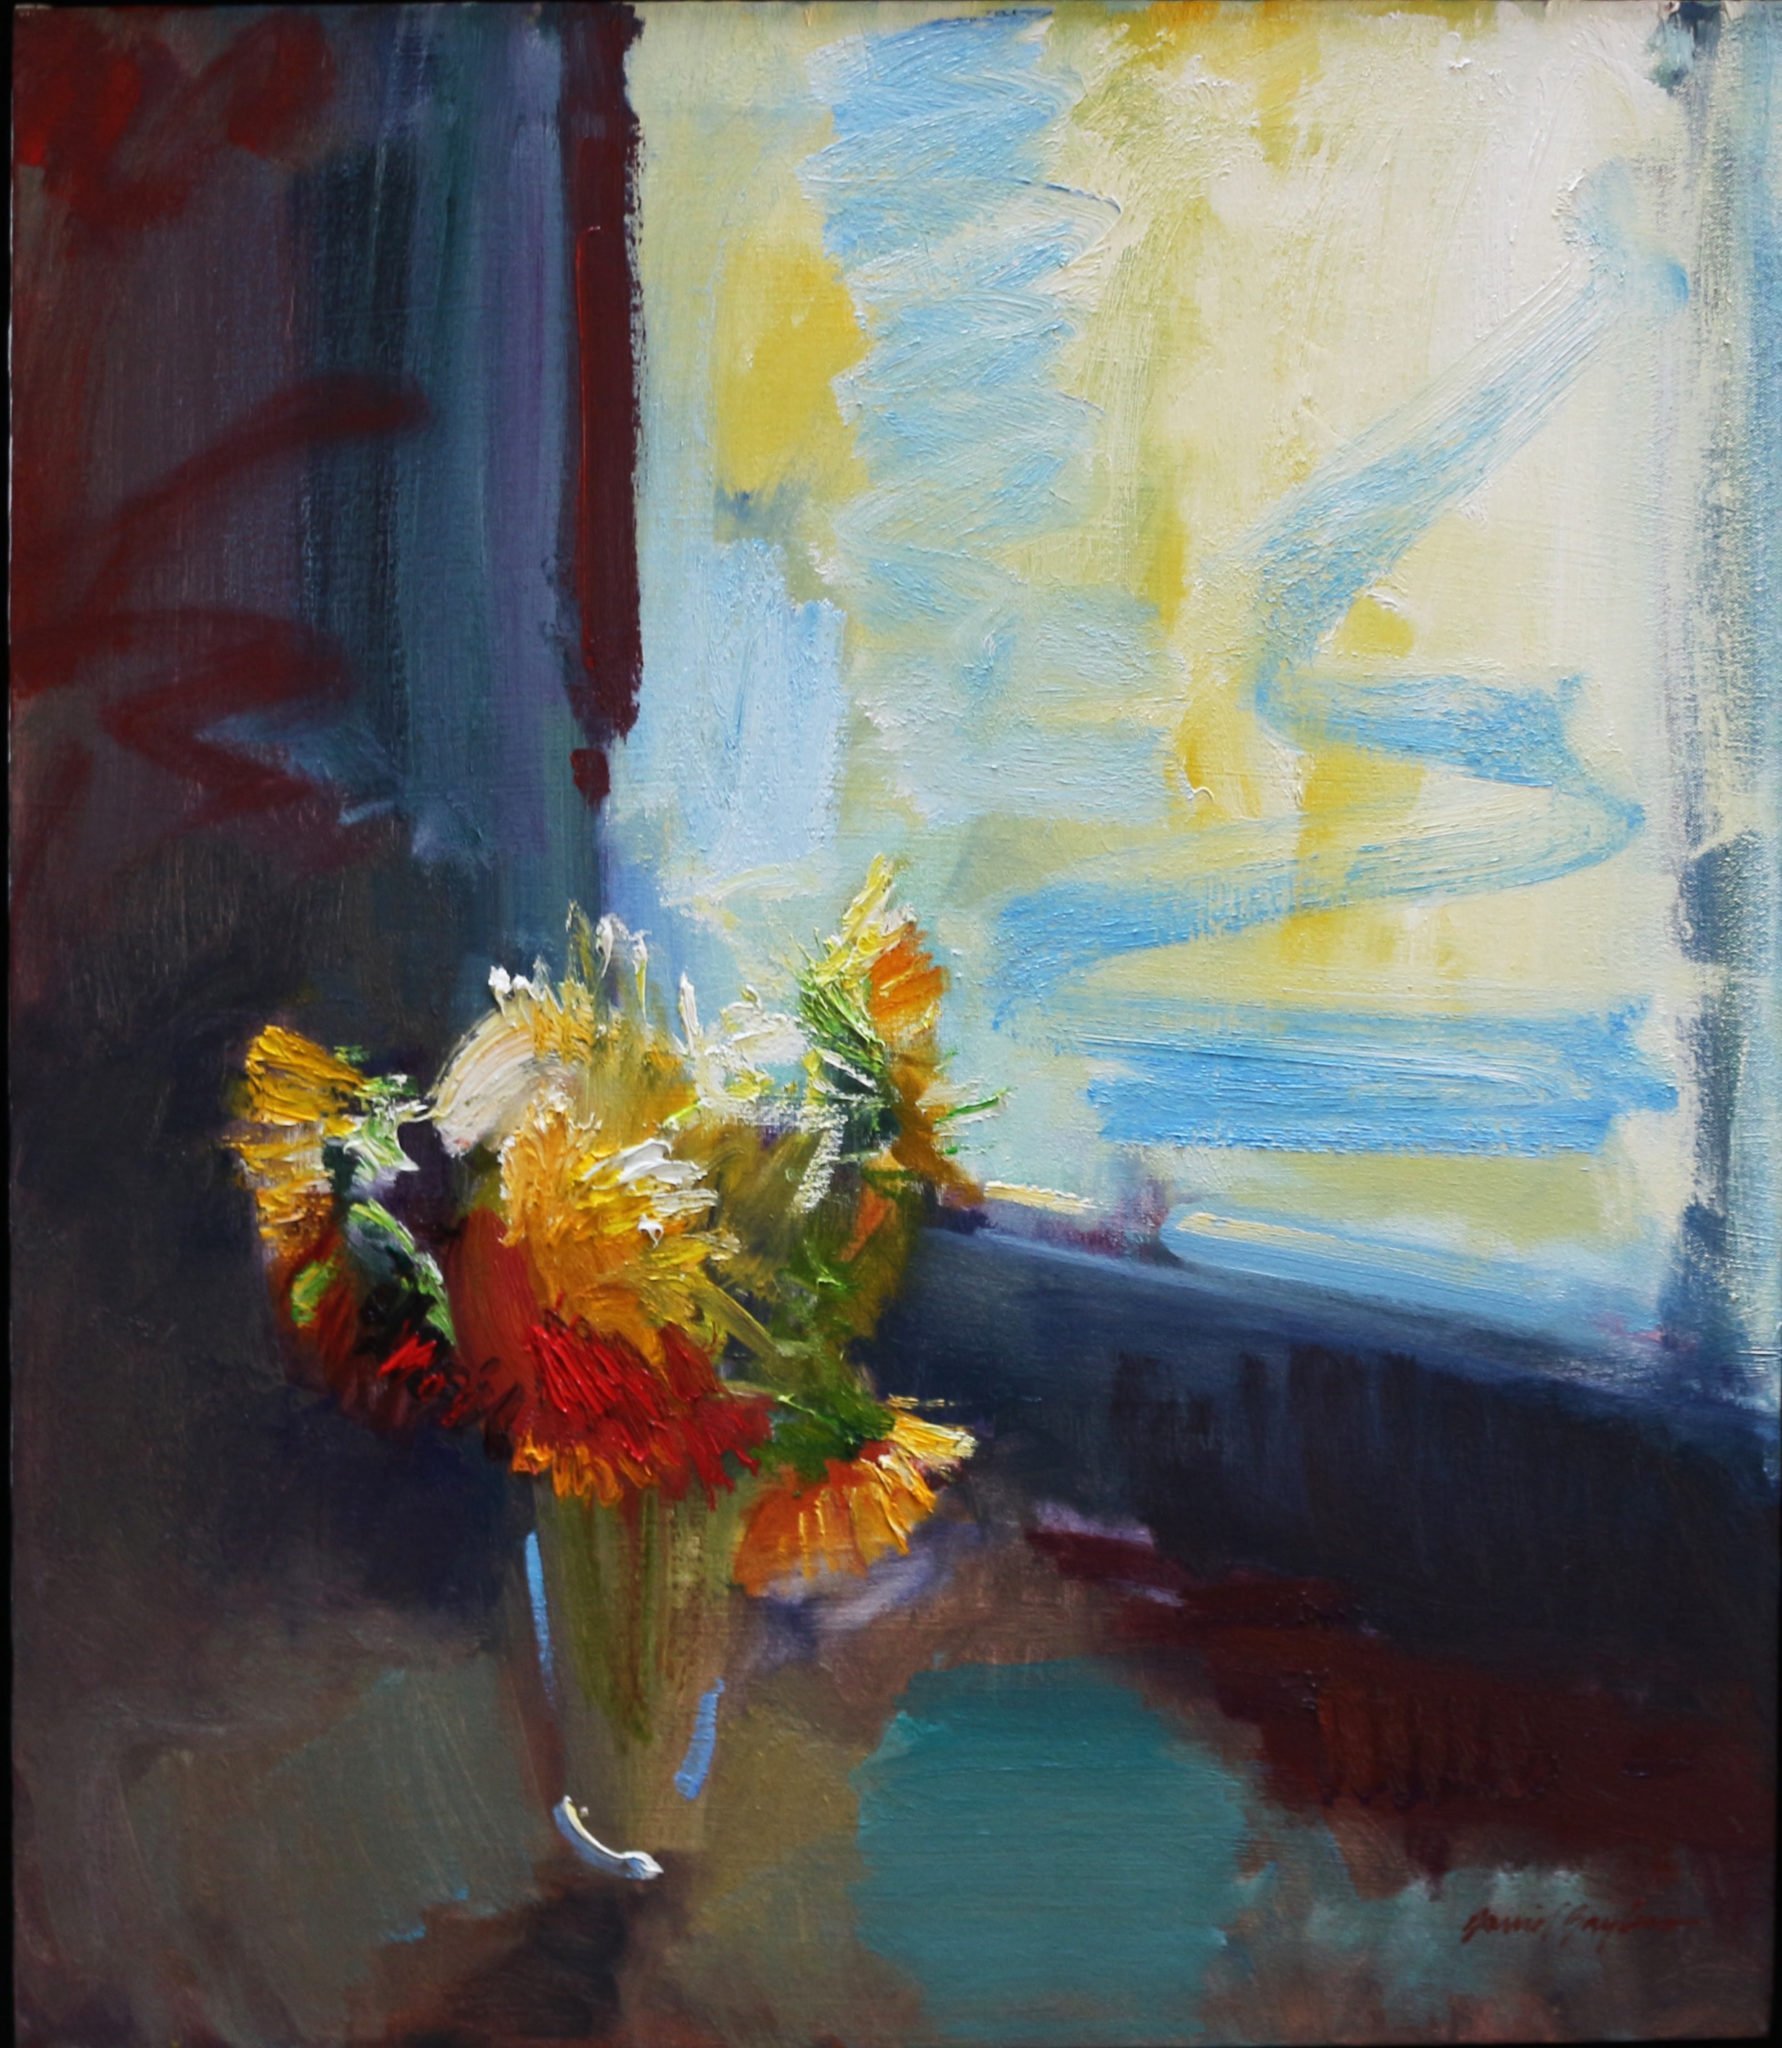 Oil on canvas painting of a vase of flowers sitting beside a window by Daniel Bayless